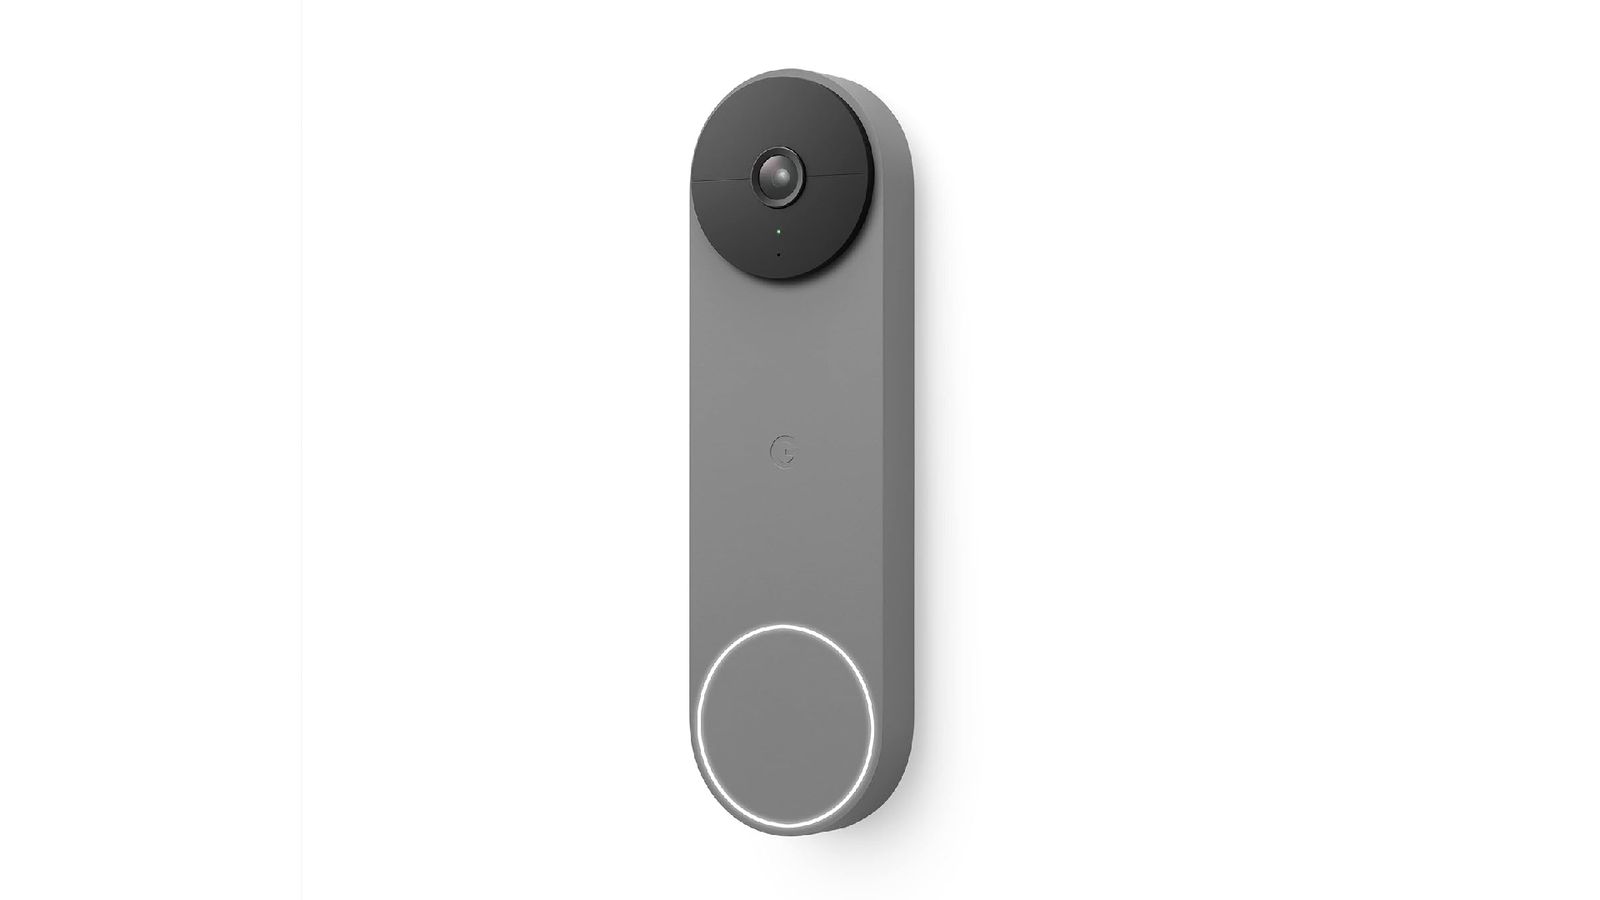 Google Nest product image of a rectangular grey with a black camera at the top.